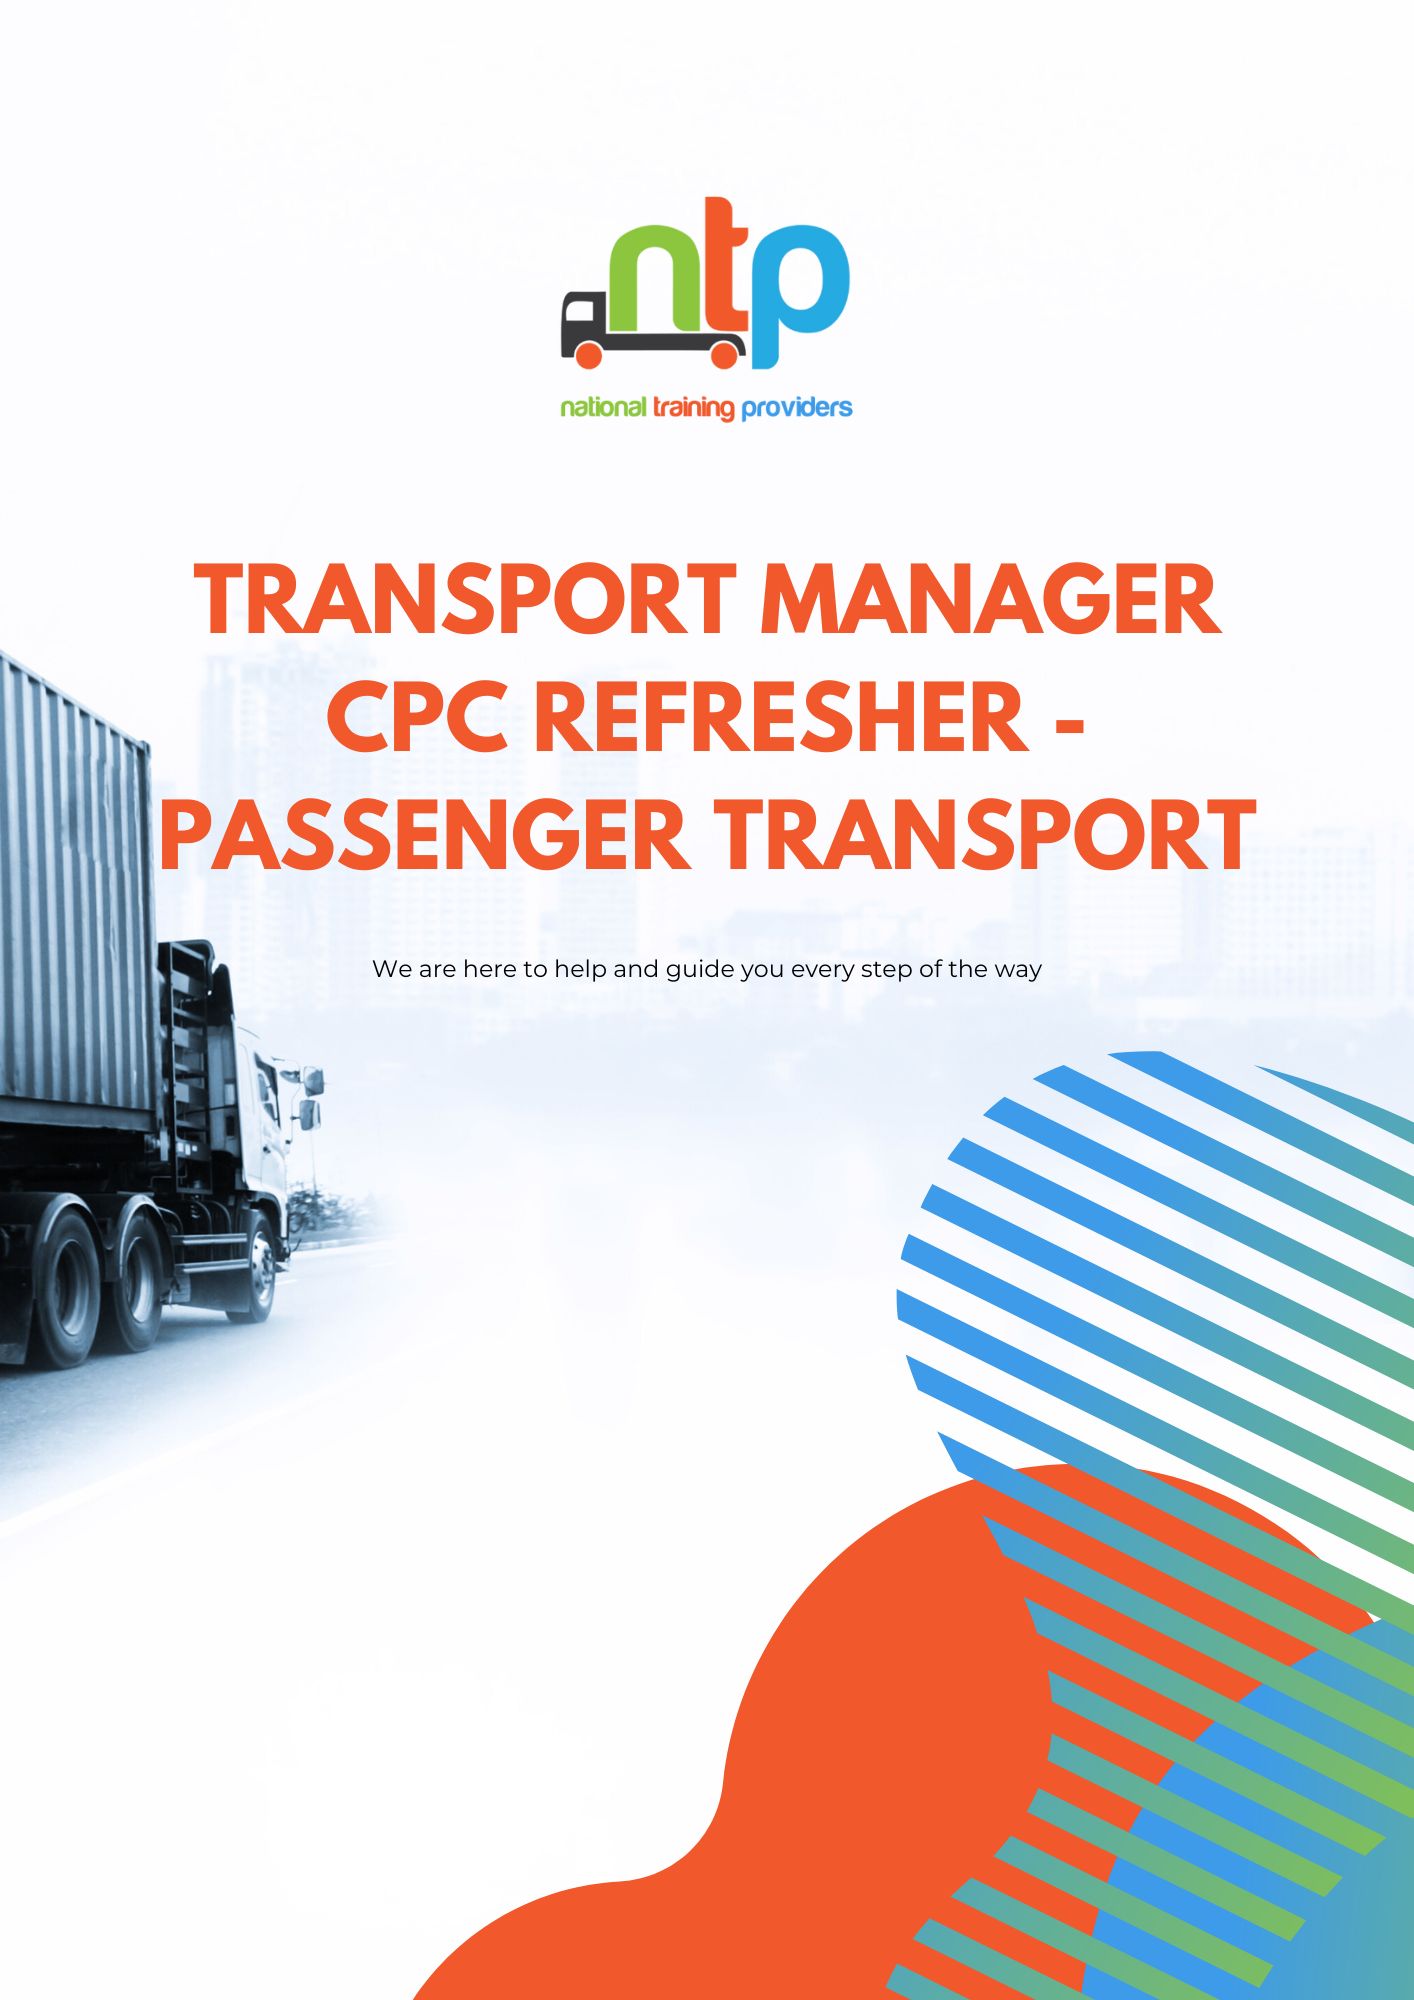 Download the transport manager refresher course information guide.